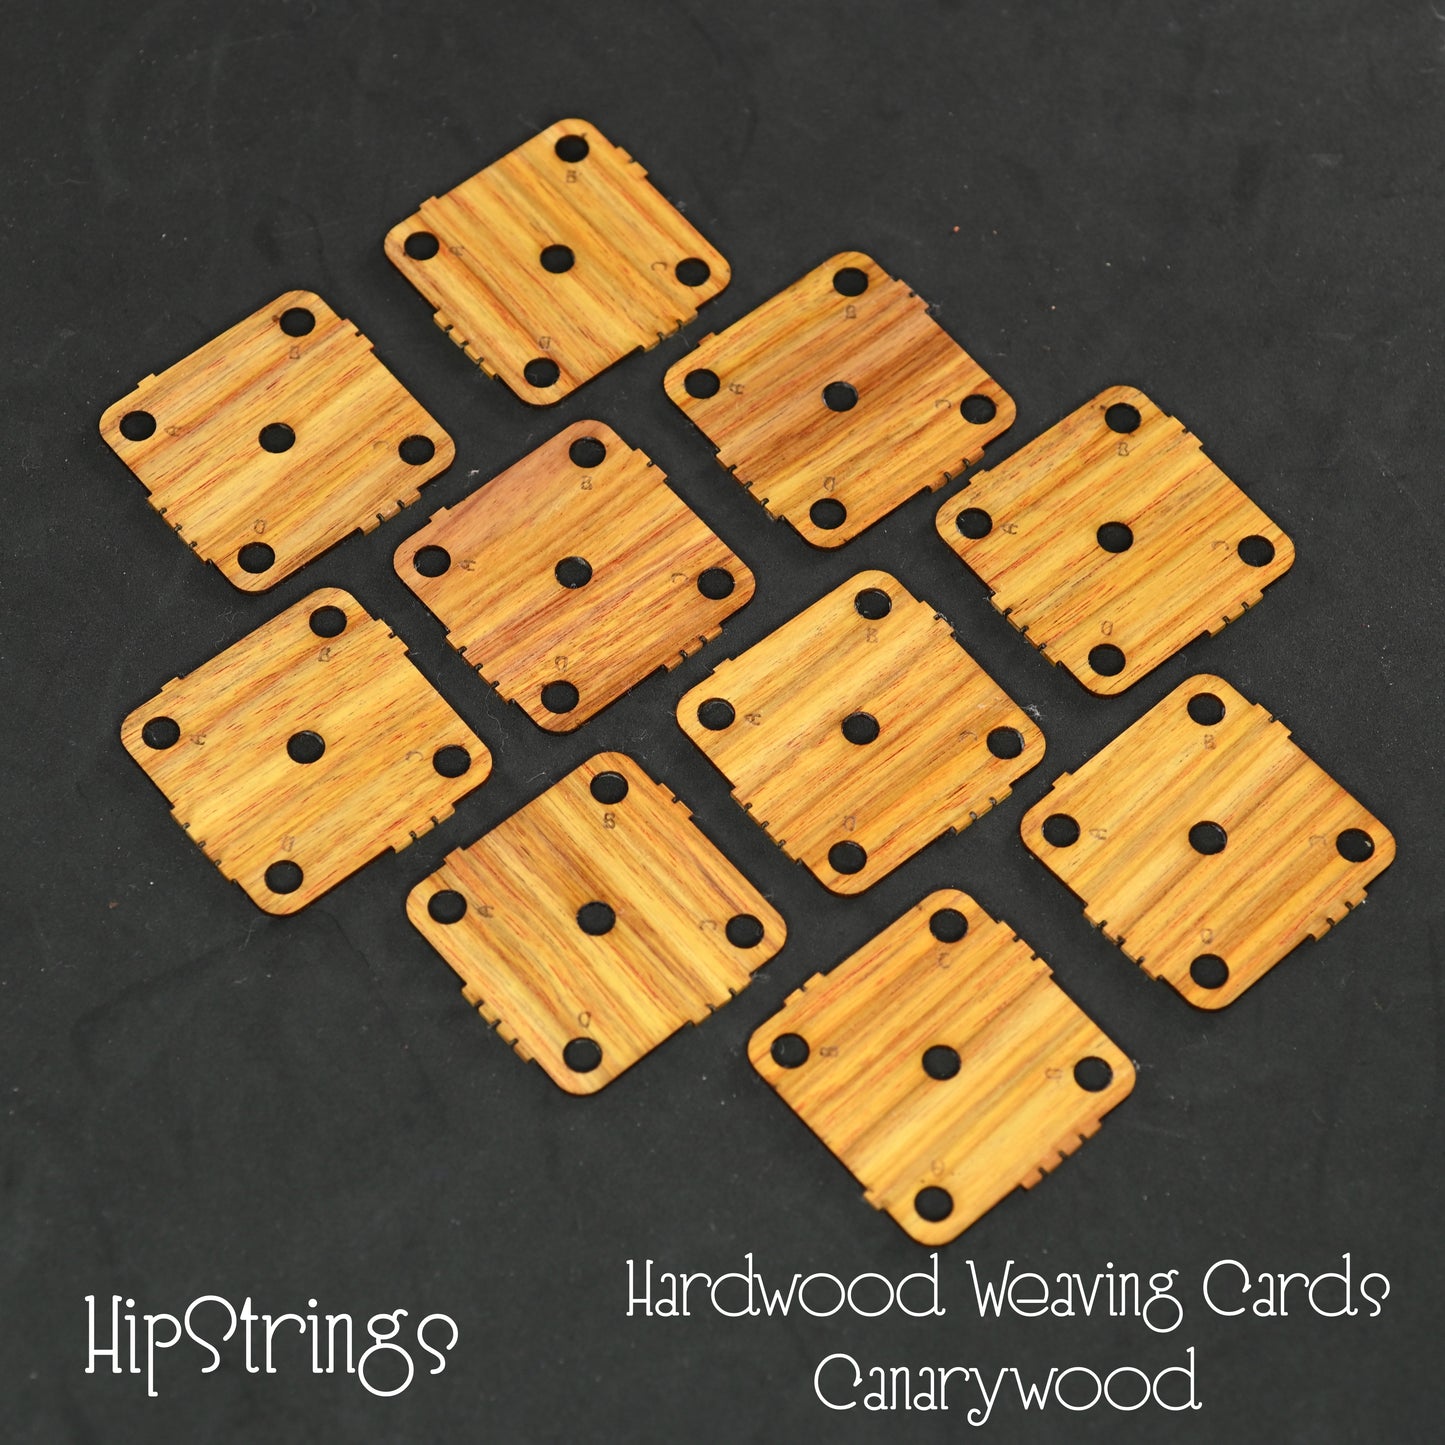 Hardwood Weaving Cards - Set of 10, 1.75 inches